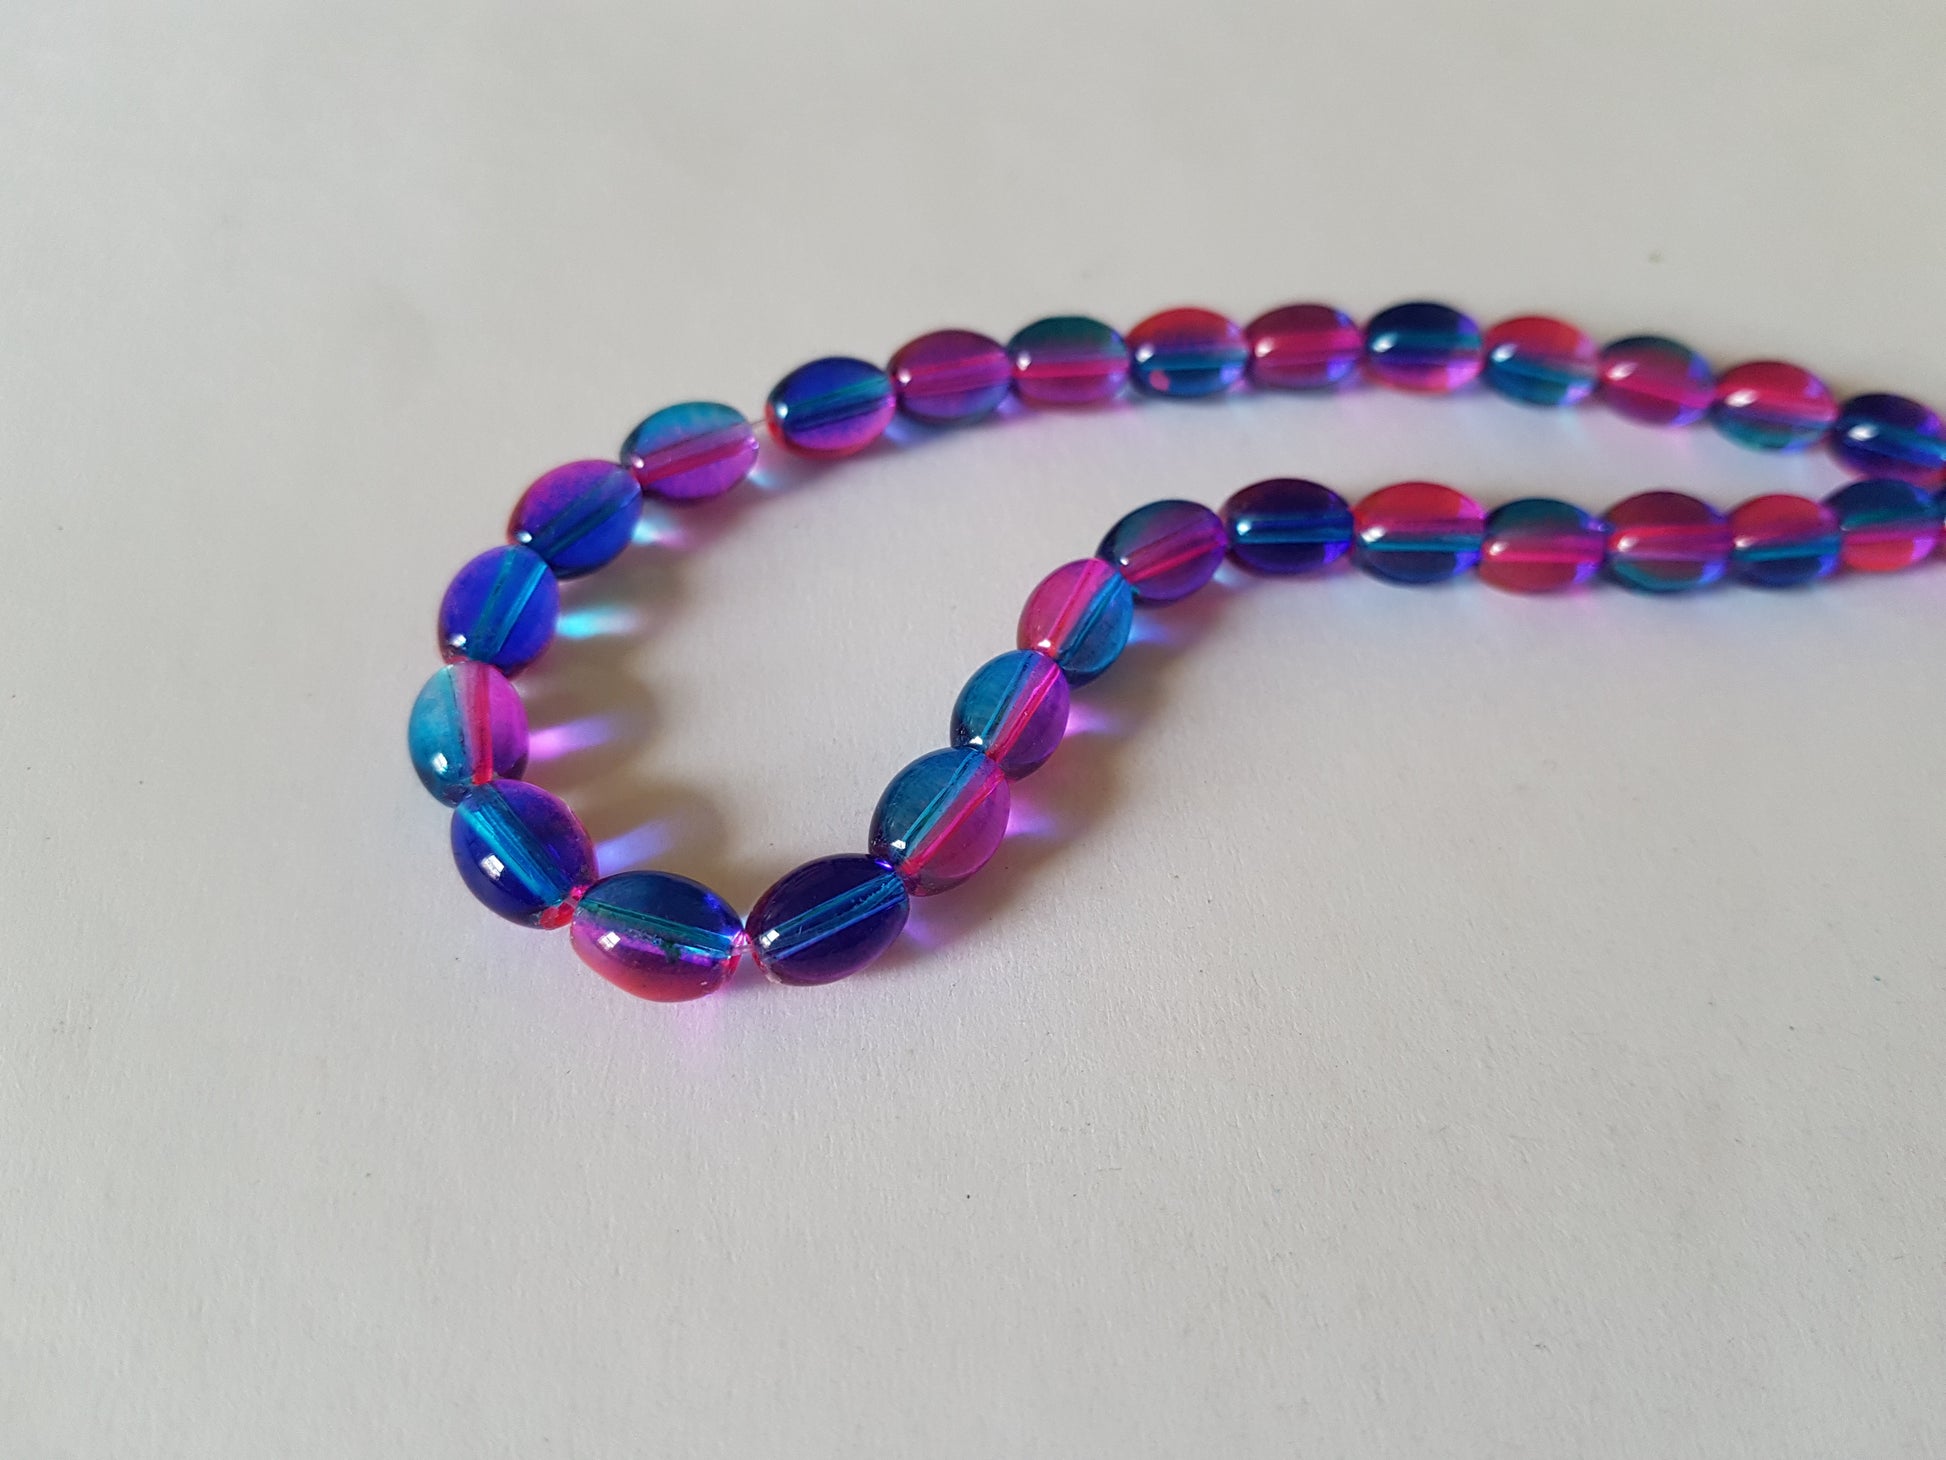 9mm 2-tone glass oval beads - pink/blue